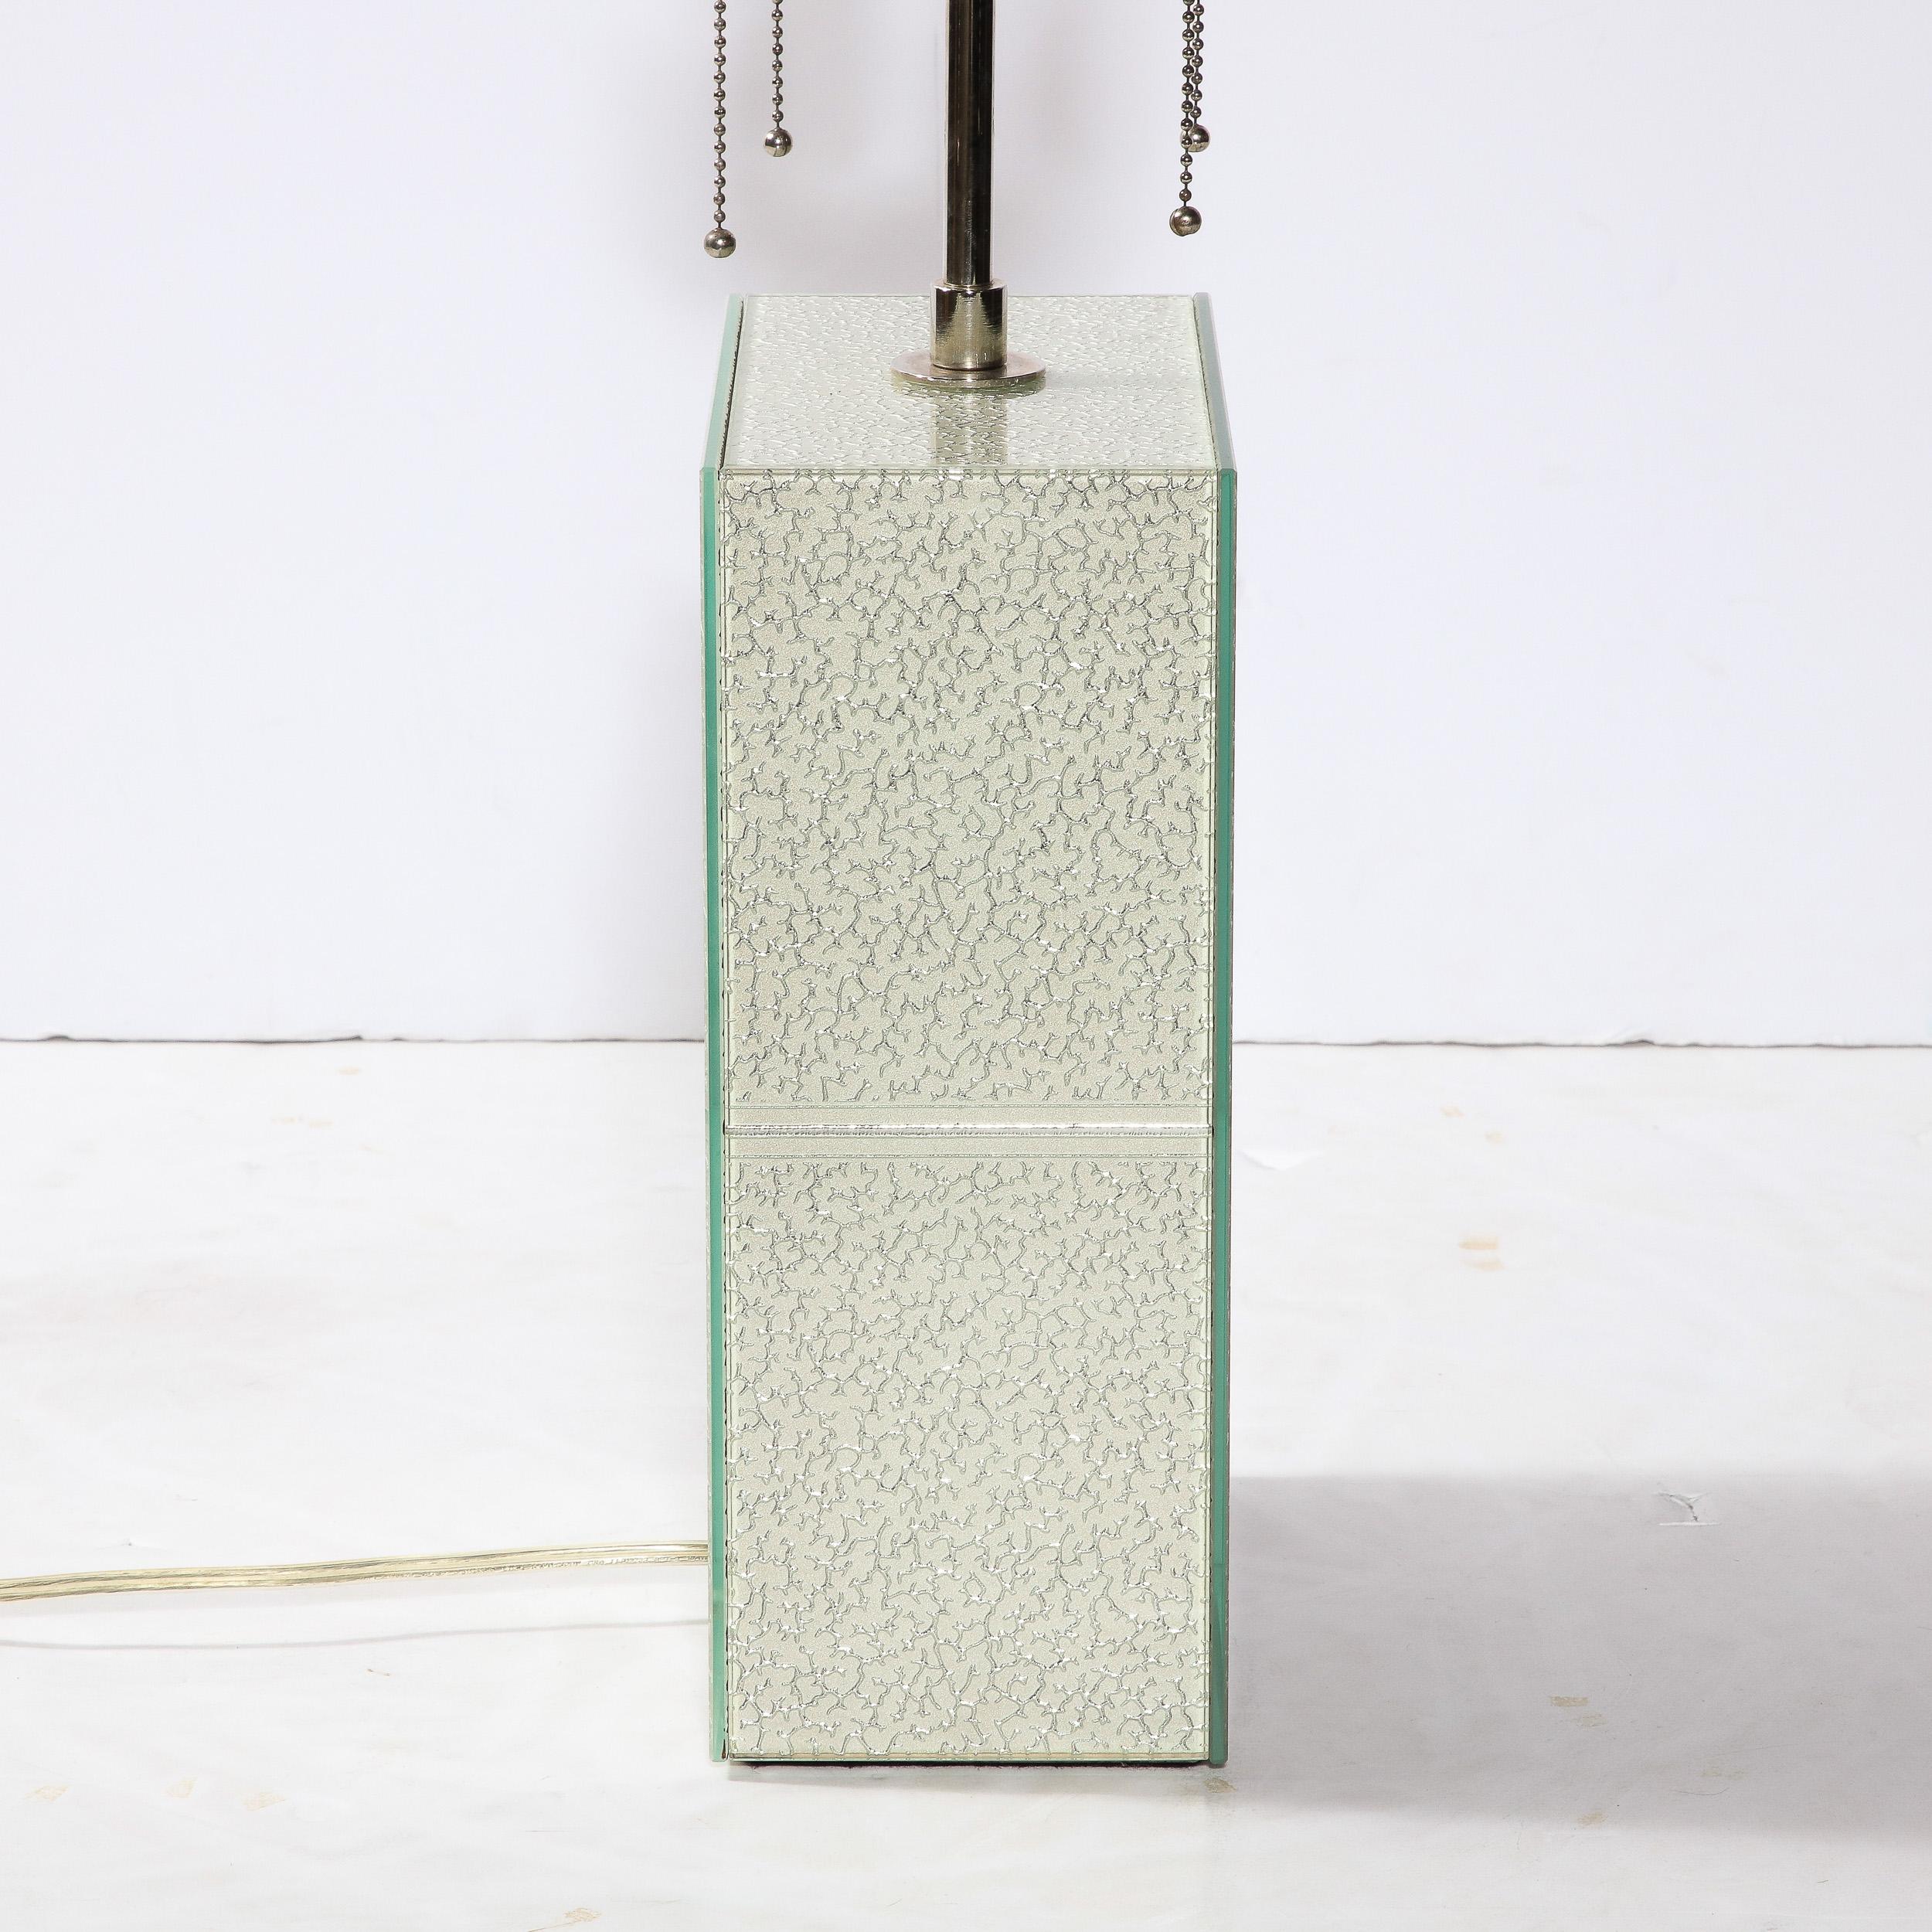 Modernist Rectilinear Glass Table Lamp in Frost Blue Craquelure by Robert Rida For Sale 6